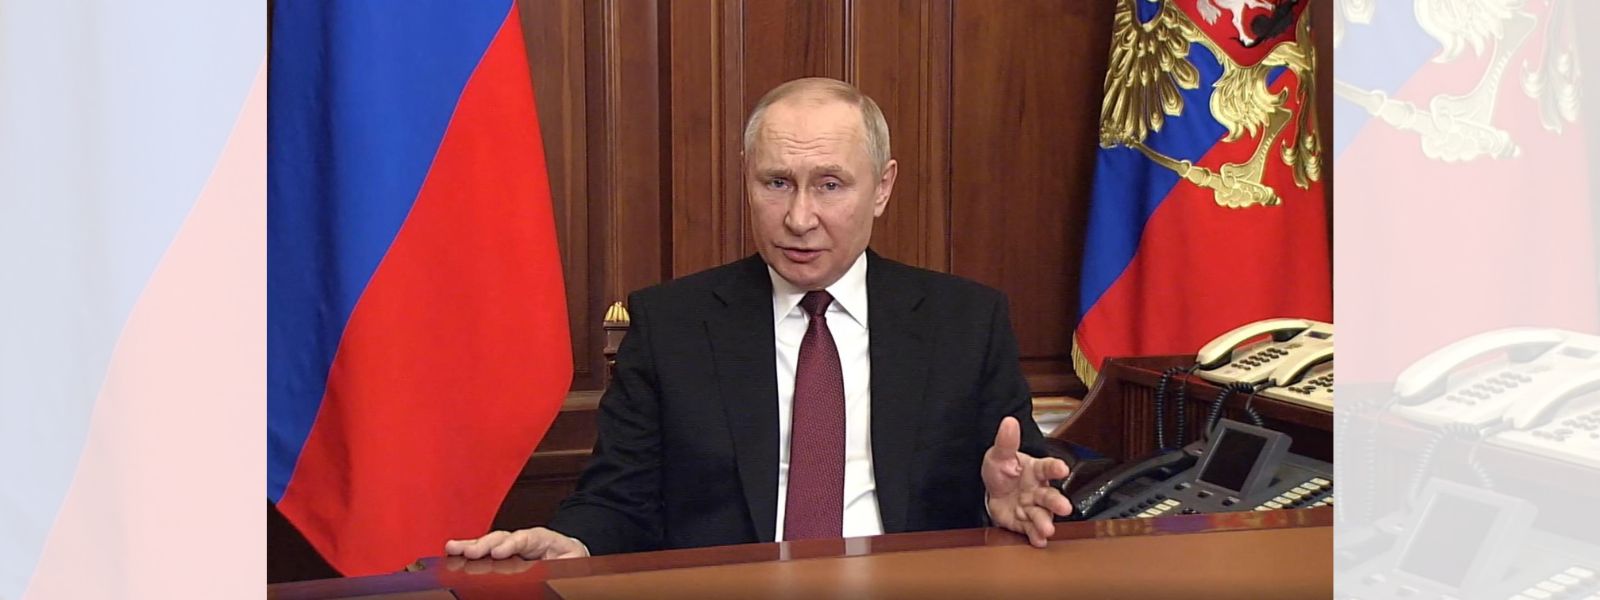 UPDATE: Putin says "Russia's future is at stake"